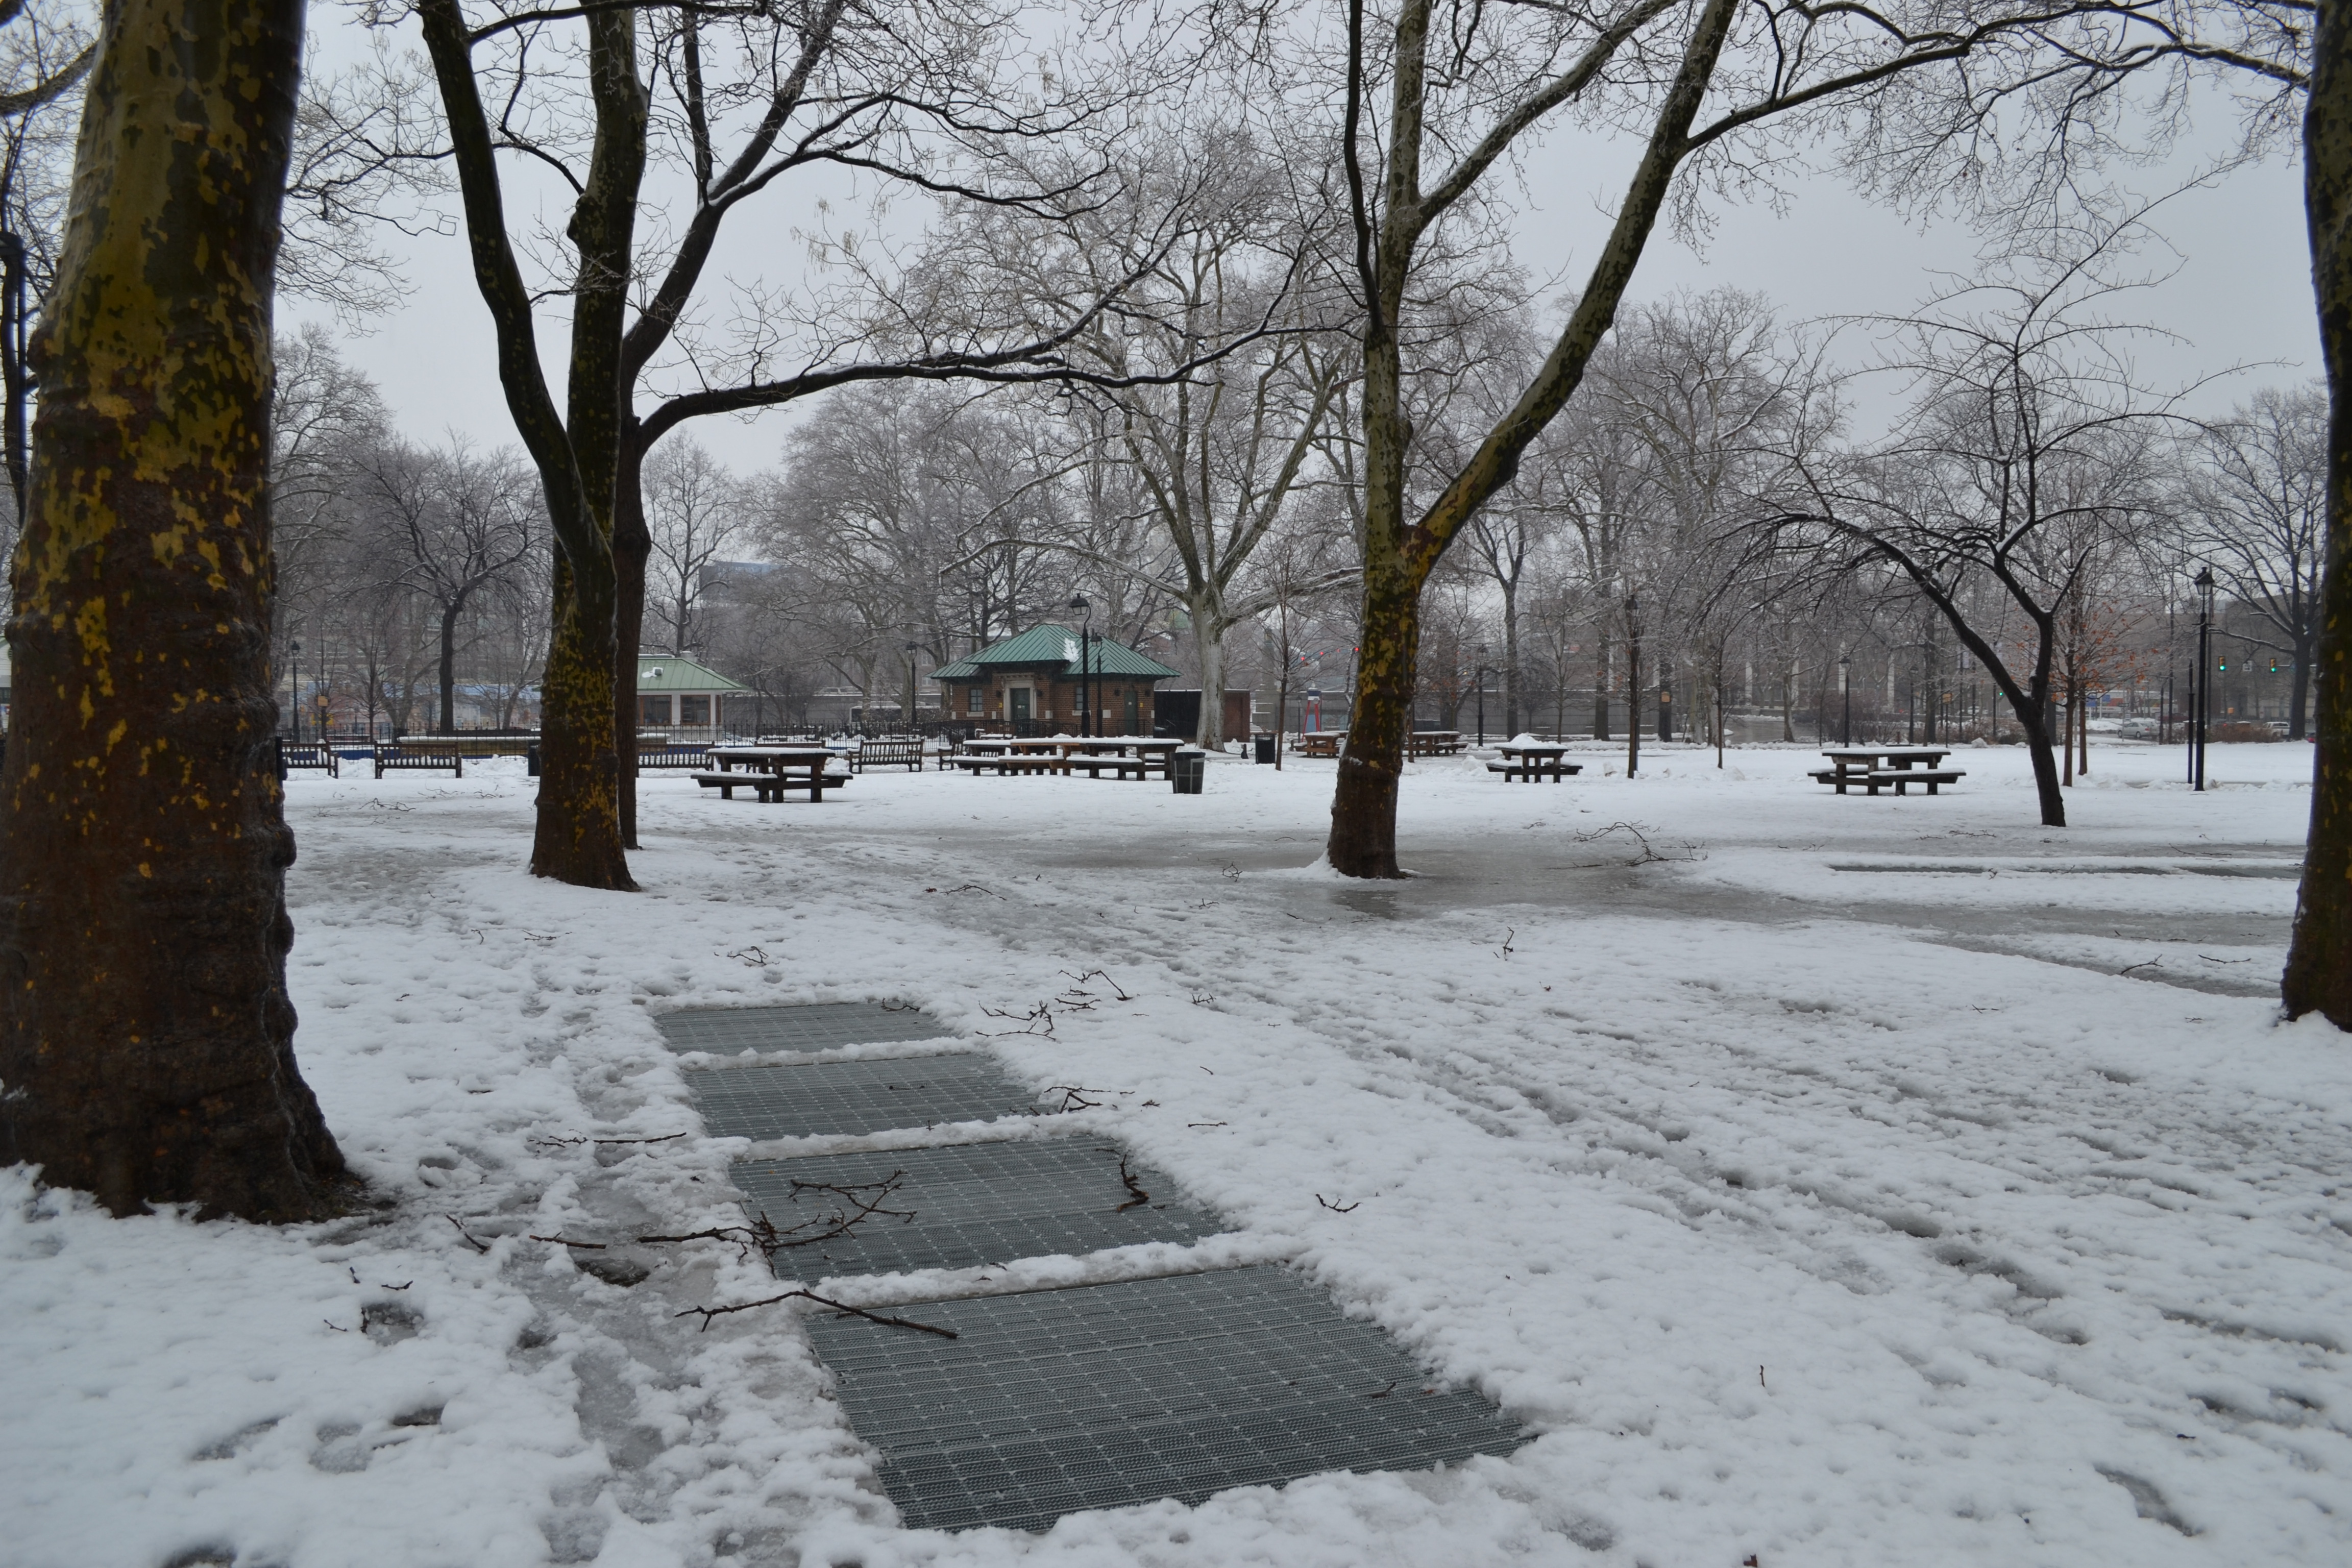 Even in the snow, subway grates betray the station's hiding space beneath the park